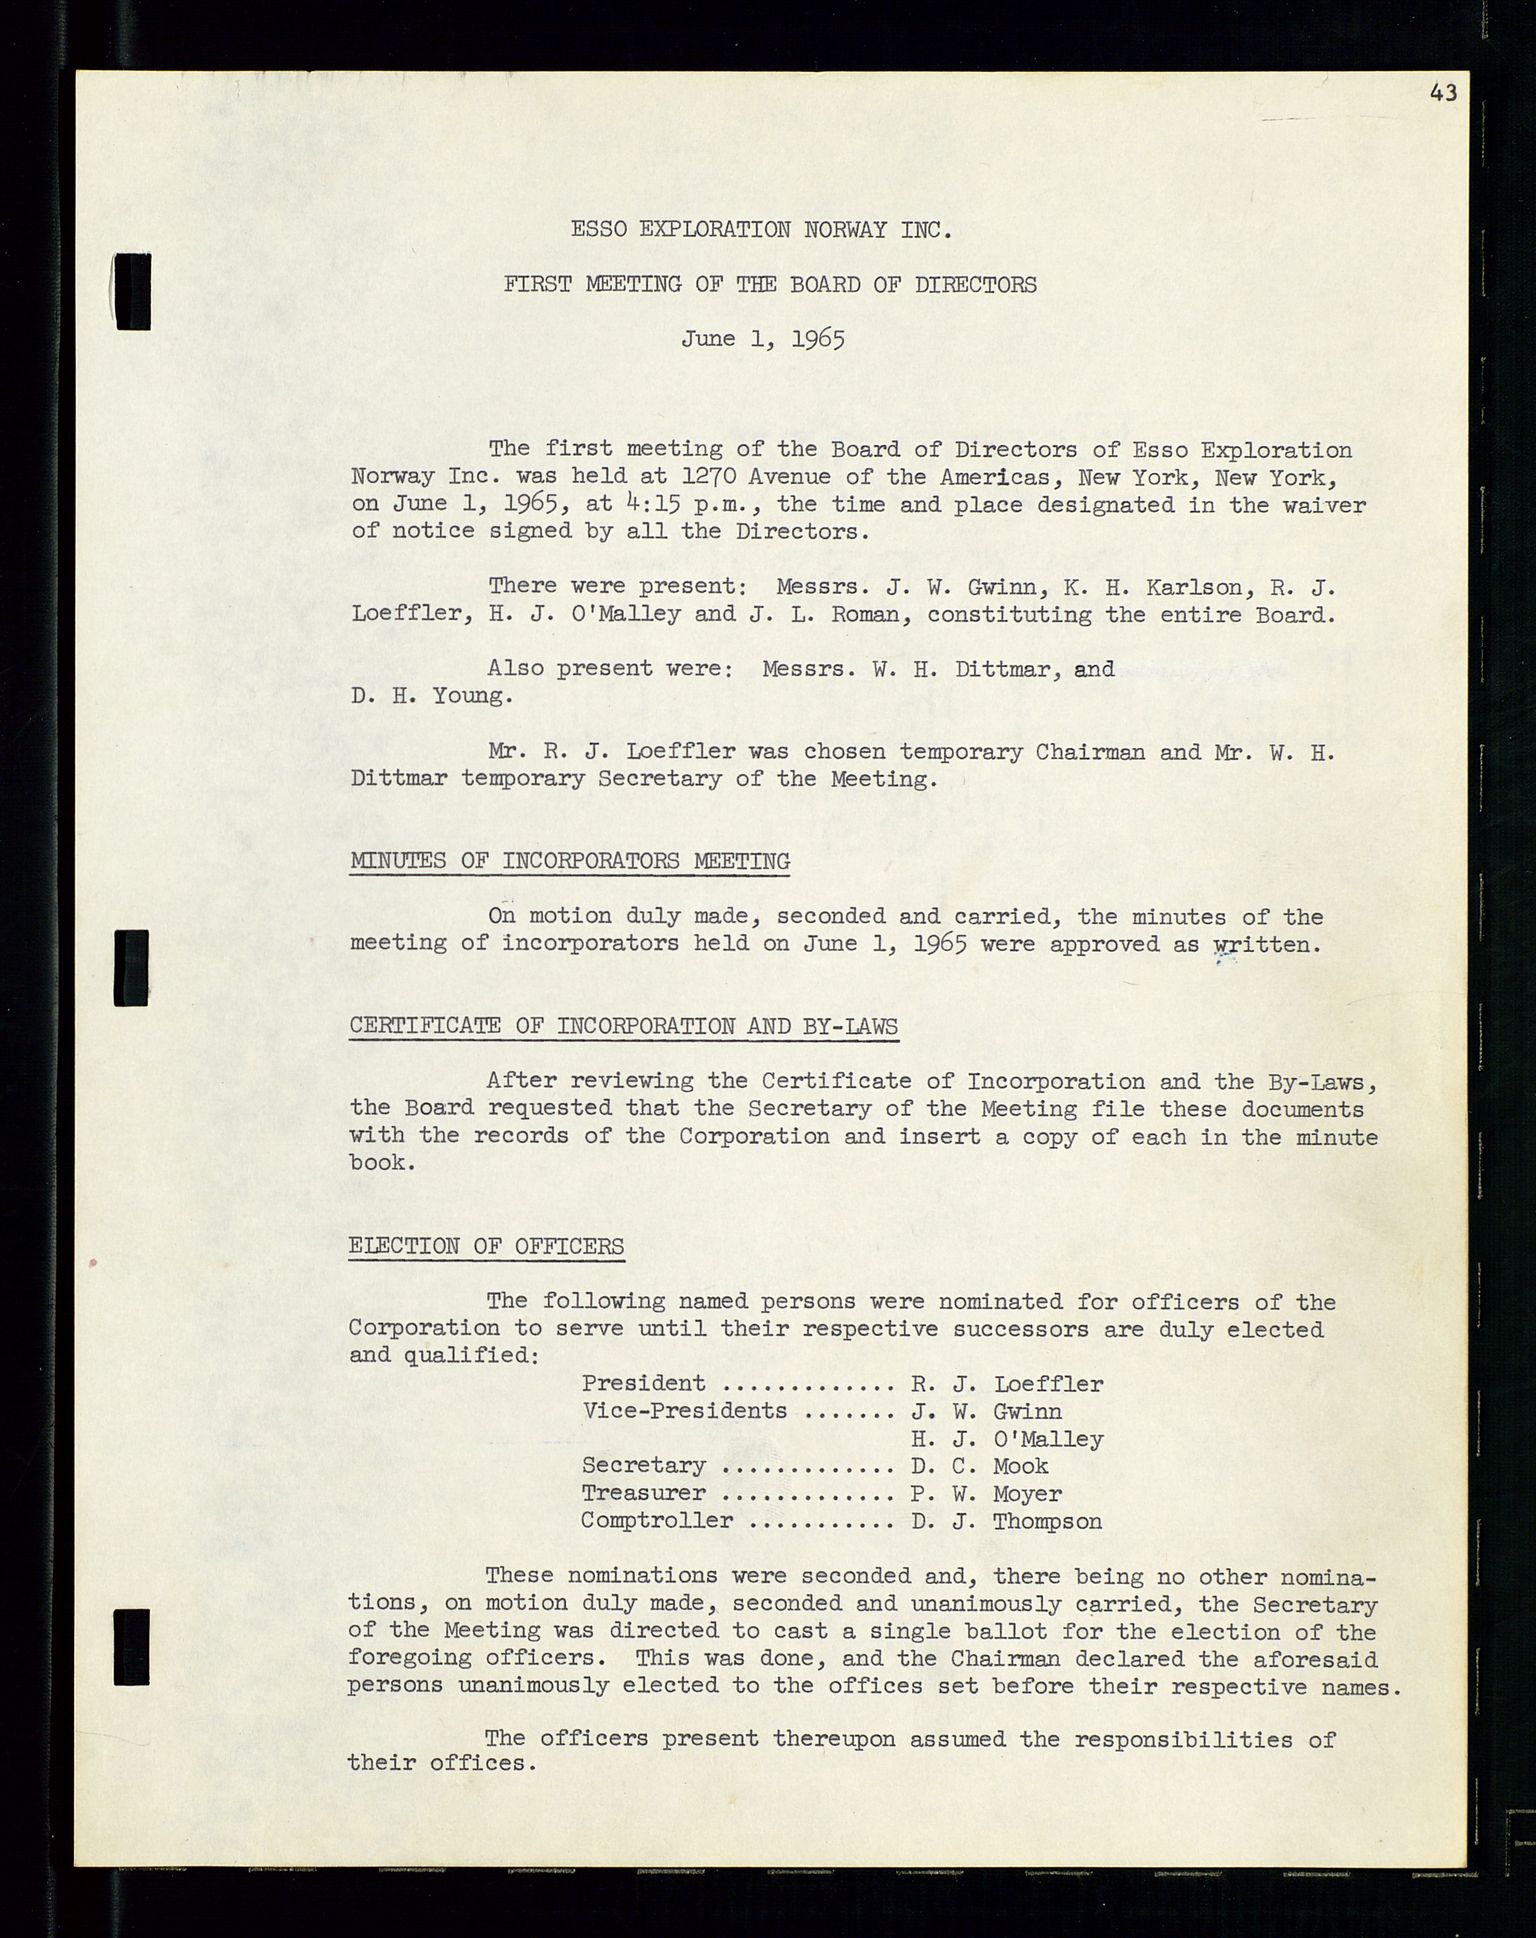 Pa 1512 - Esso Exploration and Production Norway Inc., SAST/A-101917/A/Aa/L0001/0001: Styredokumenter / Corporate records, By-Laws, Board meeting minutes, Incorporations, 1965-1975, p. 43